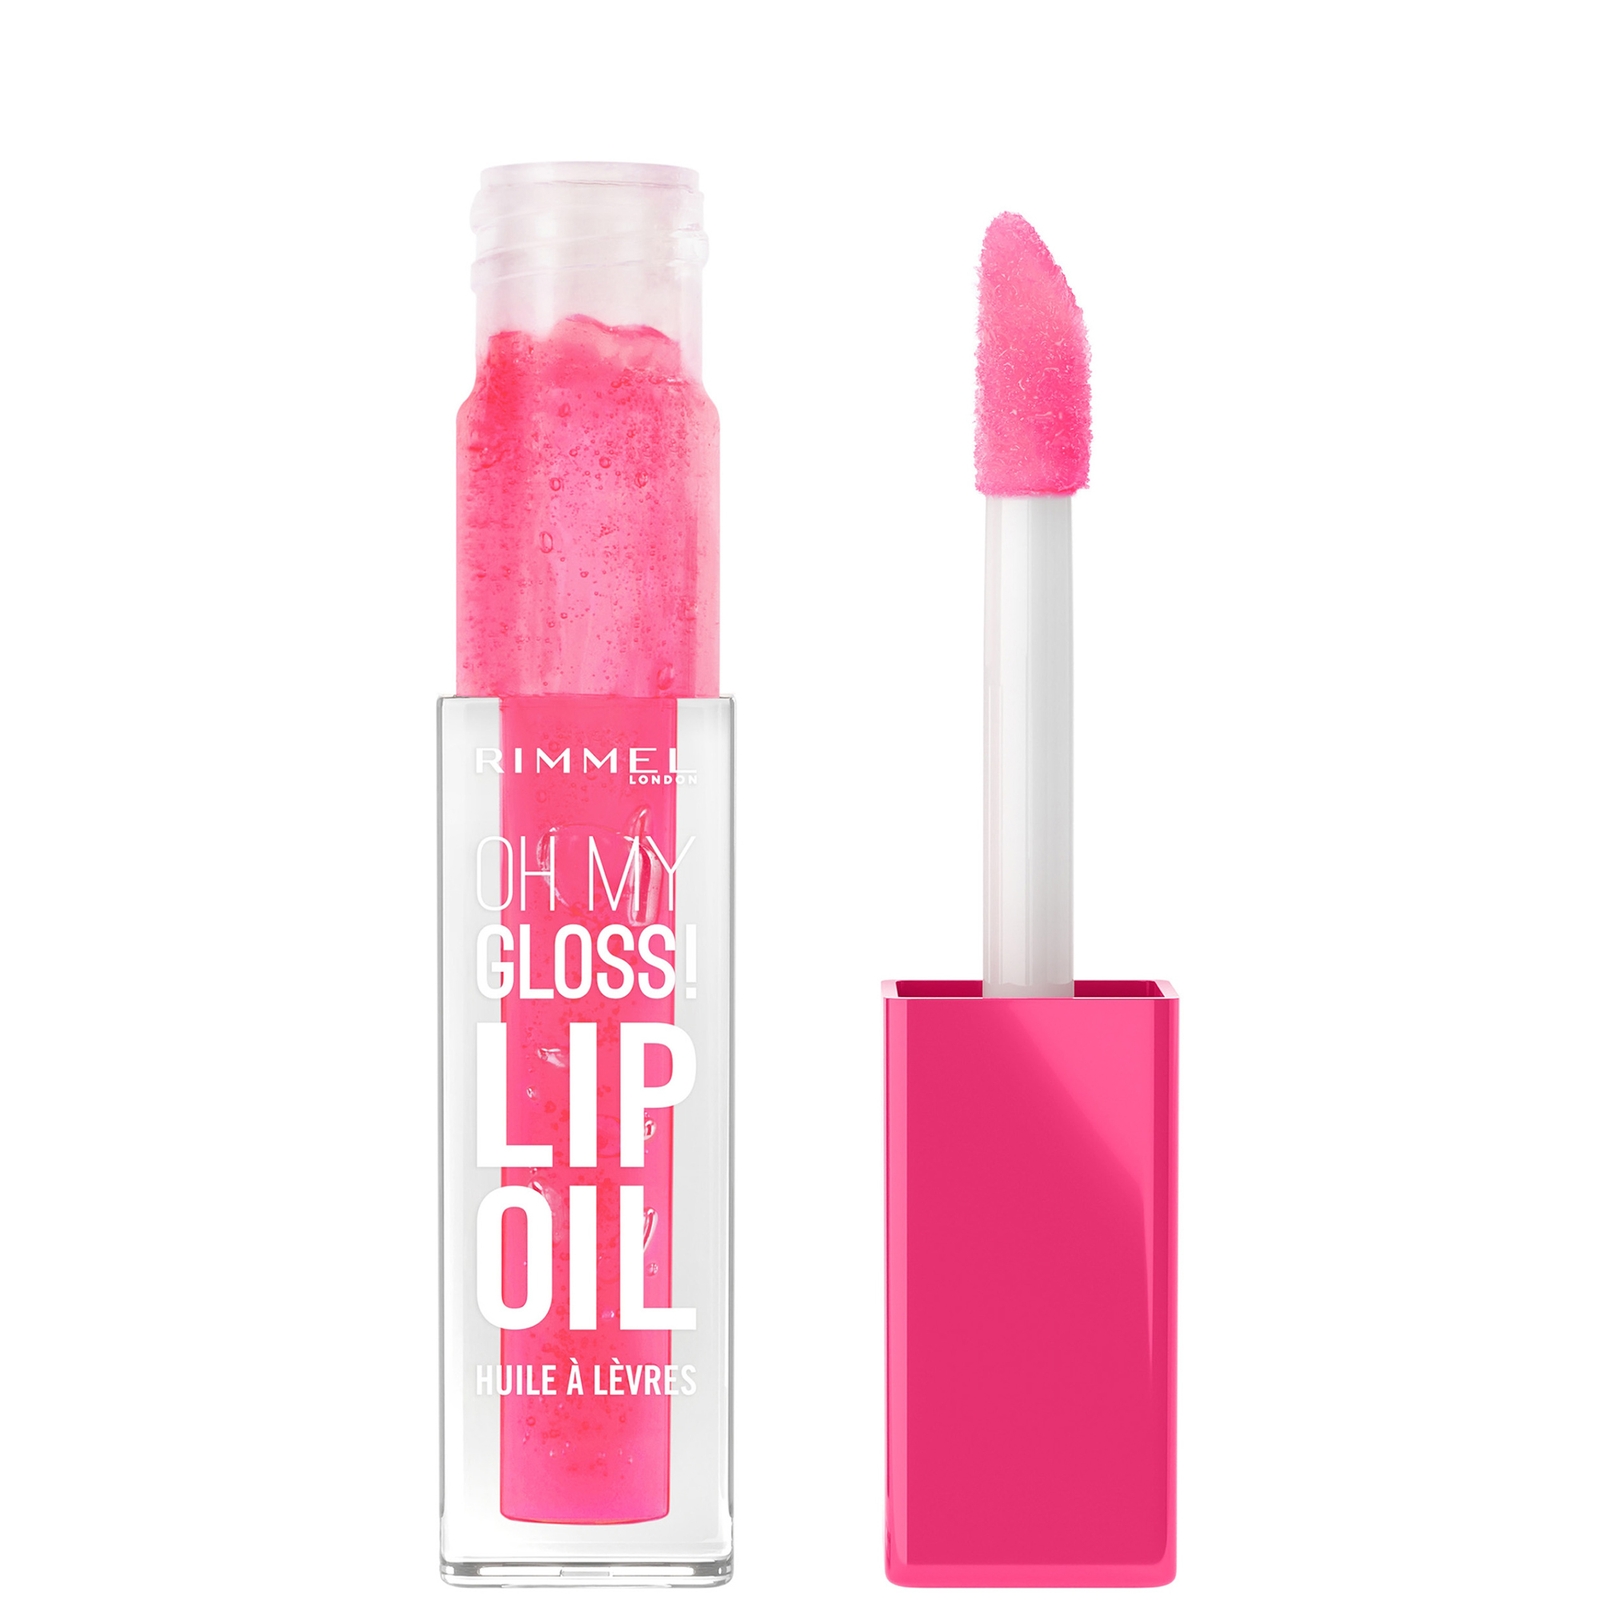 Rimmel Oh My Gloss! Lip Oil 6ml (various Shades) - Berry Pink